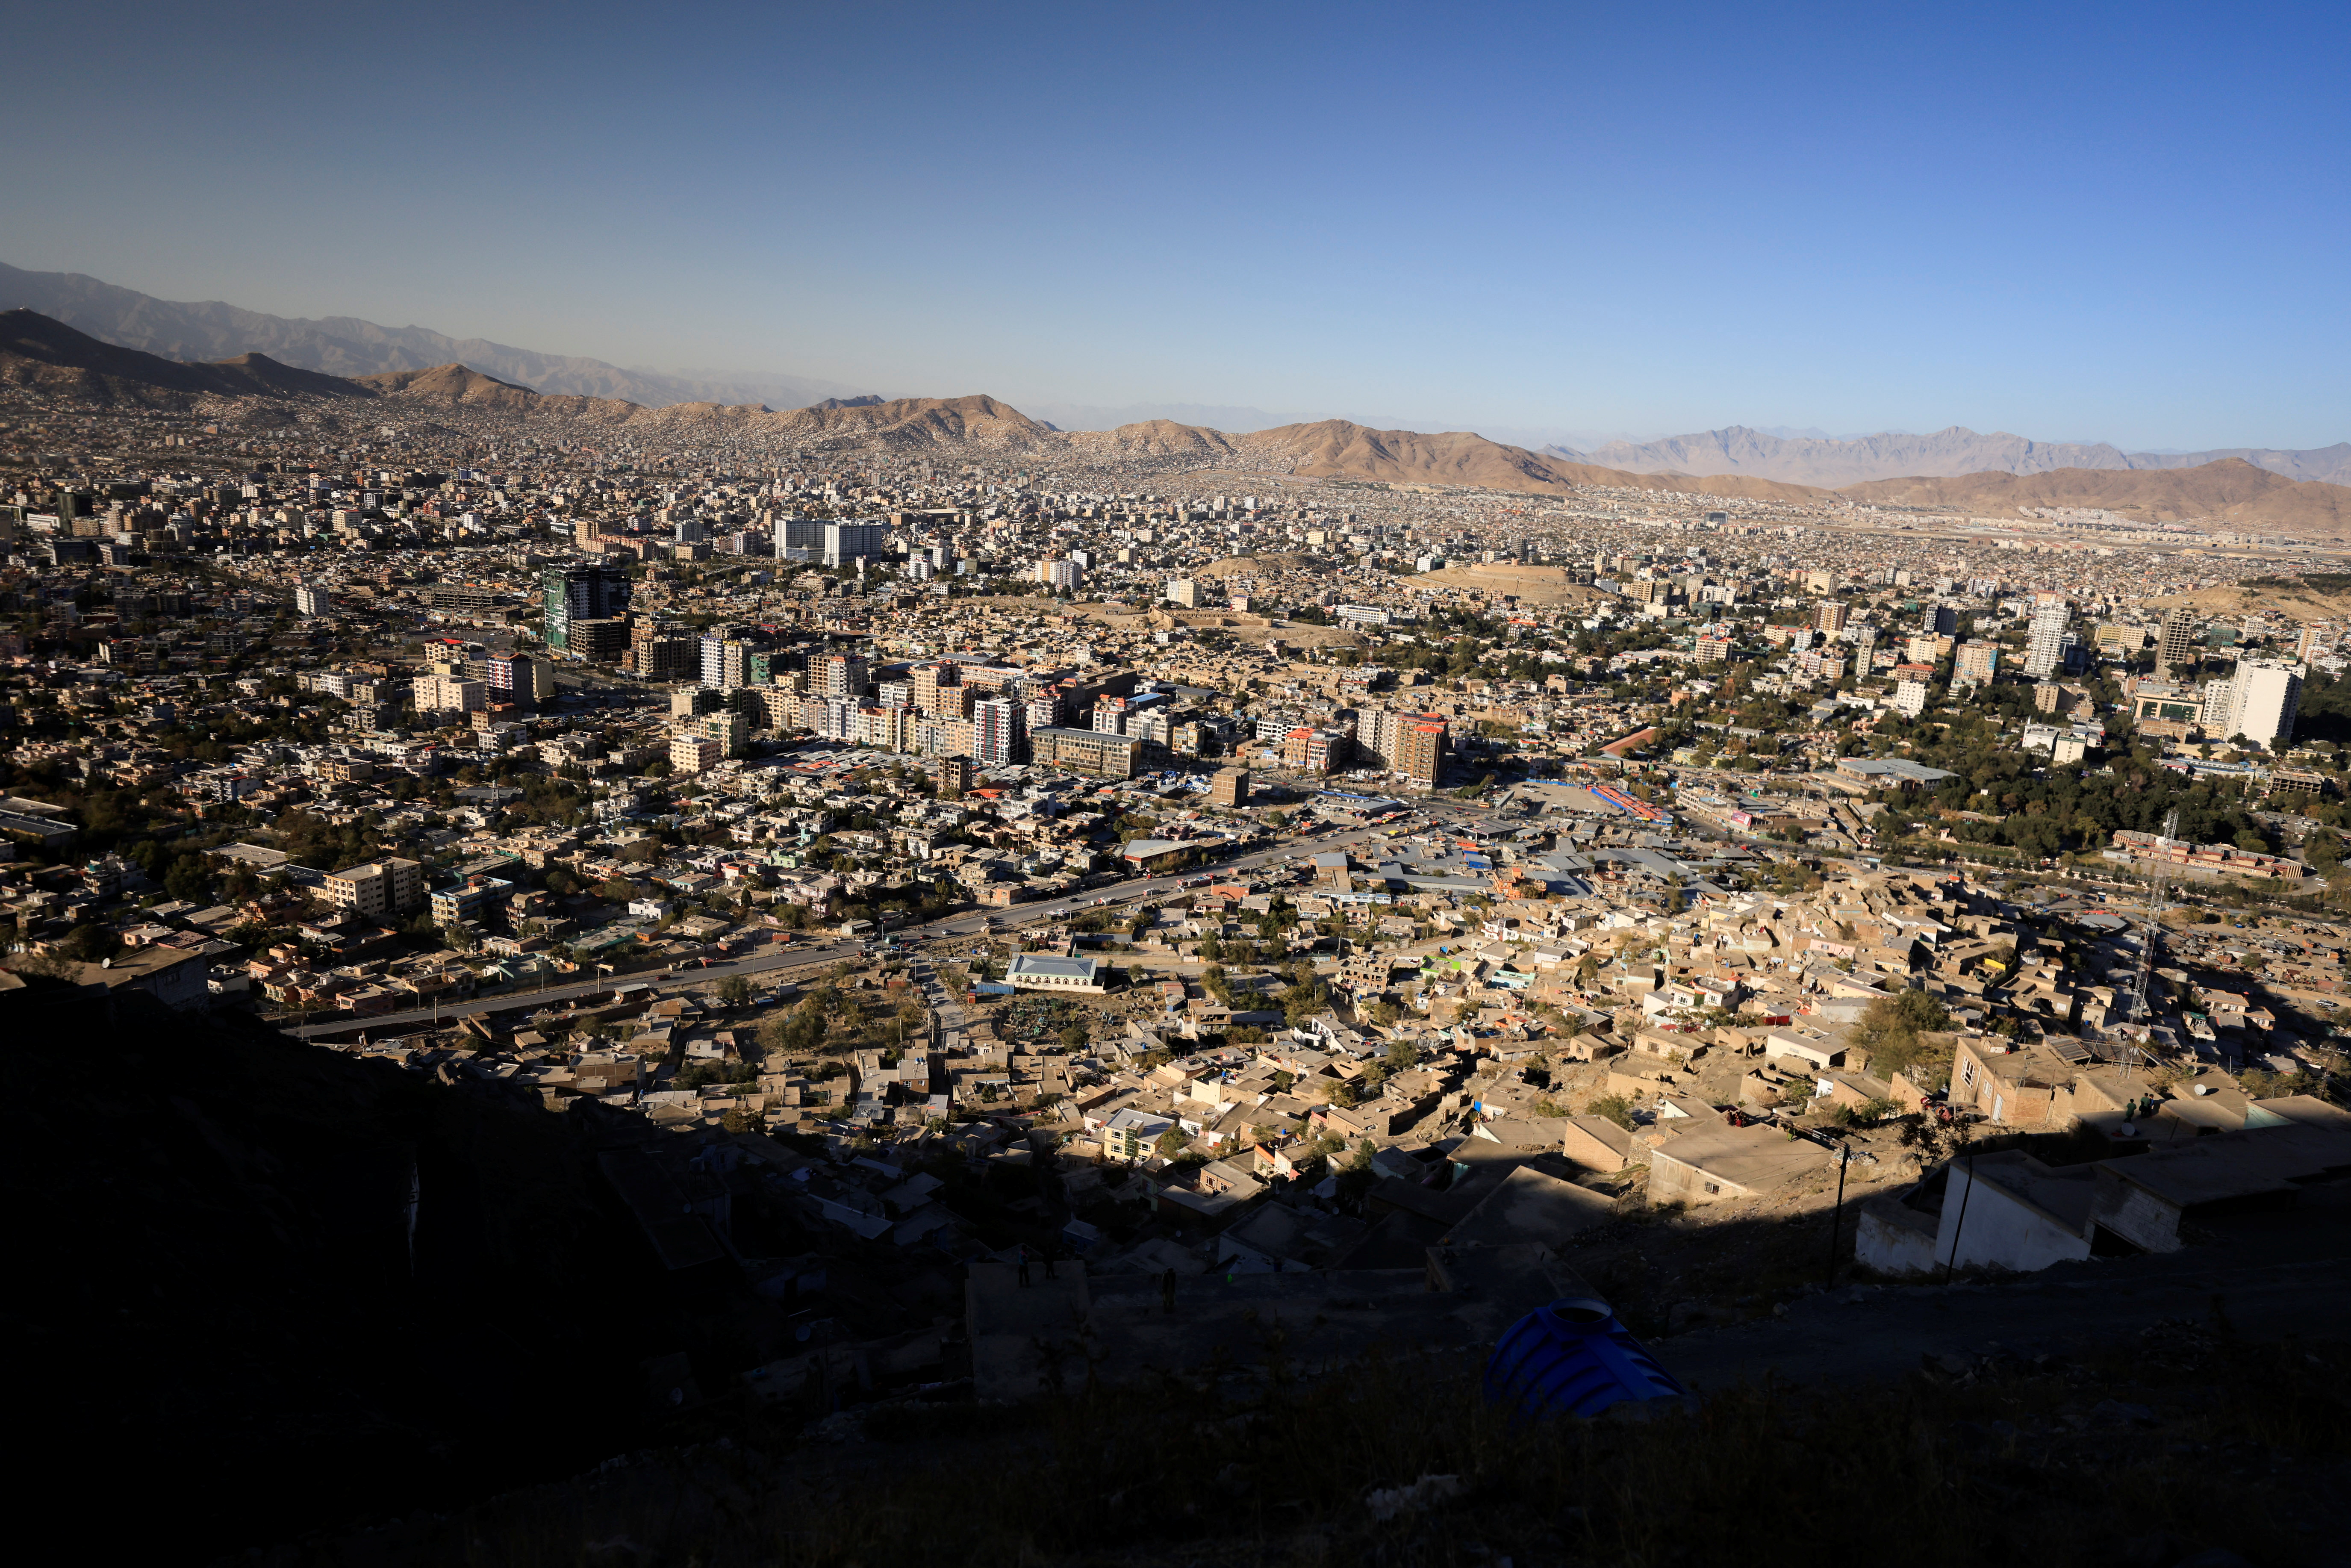 A view over a part of Kabul from the Tv mountain